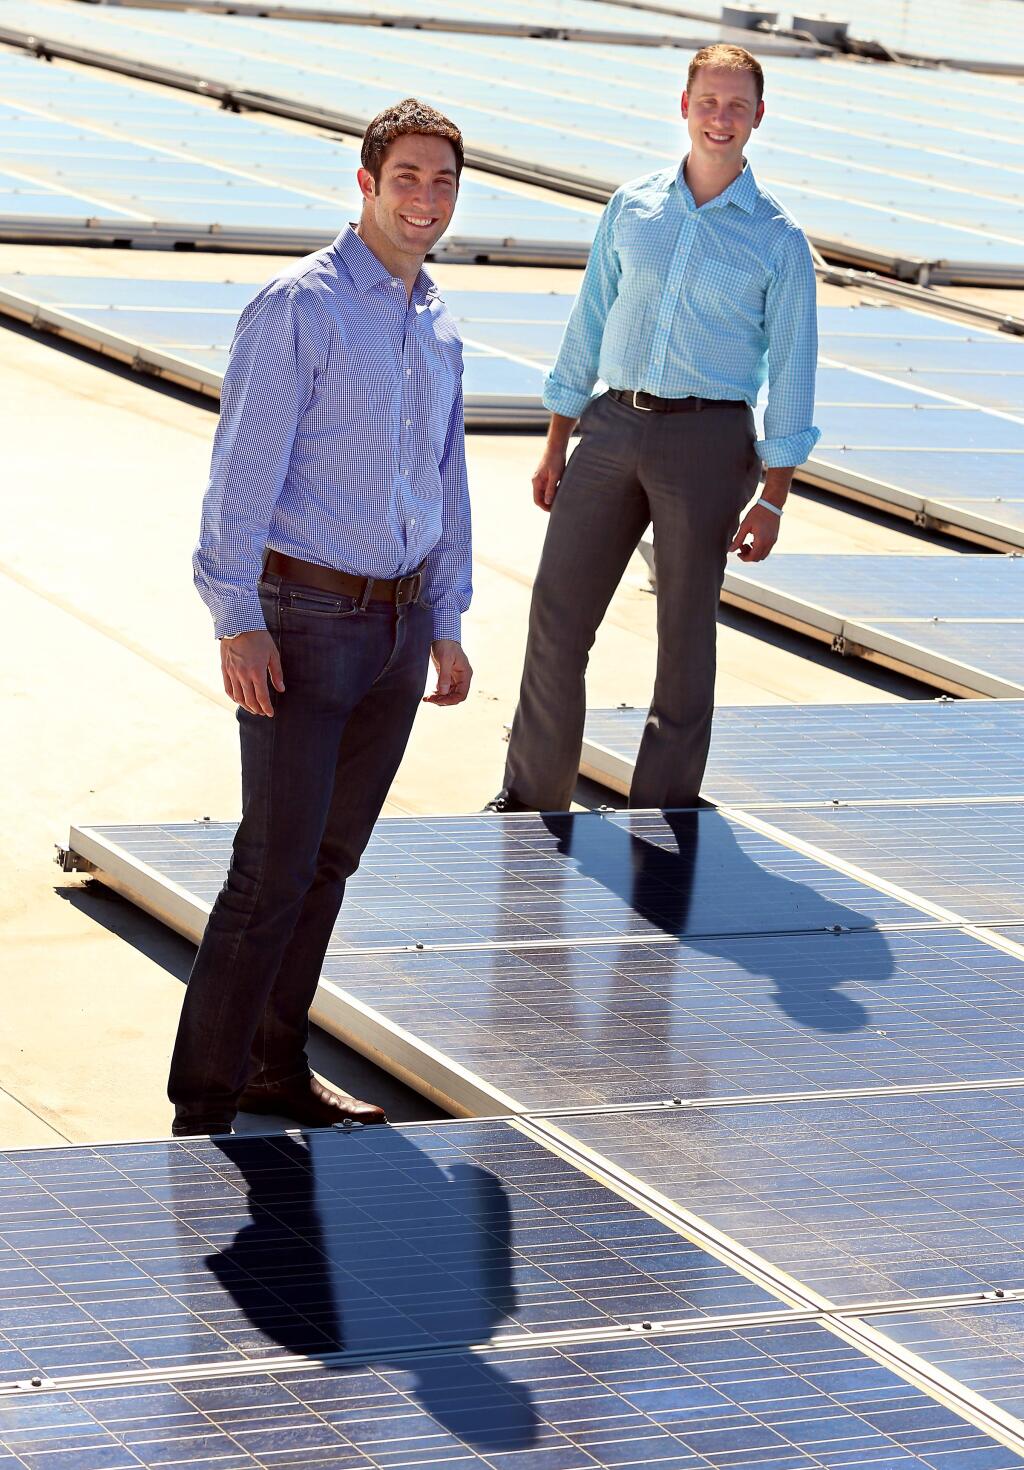 Soligent chief executive officer Jonathan Doochin, left, and chief operating officer Mark Laabs. Soligent is one of the nation's largest distributors of solar equipment and services.